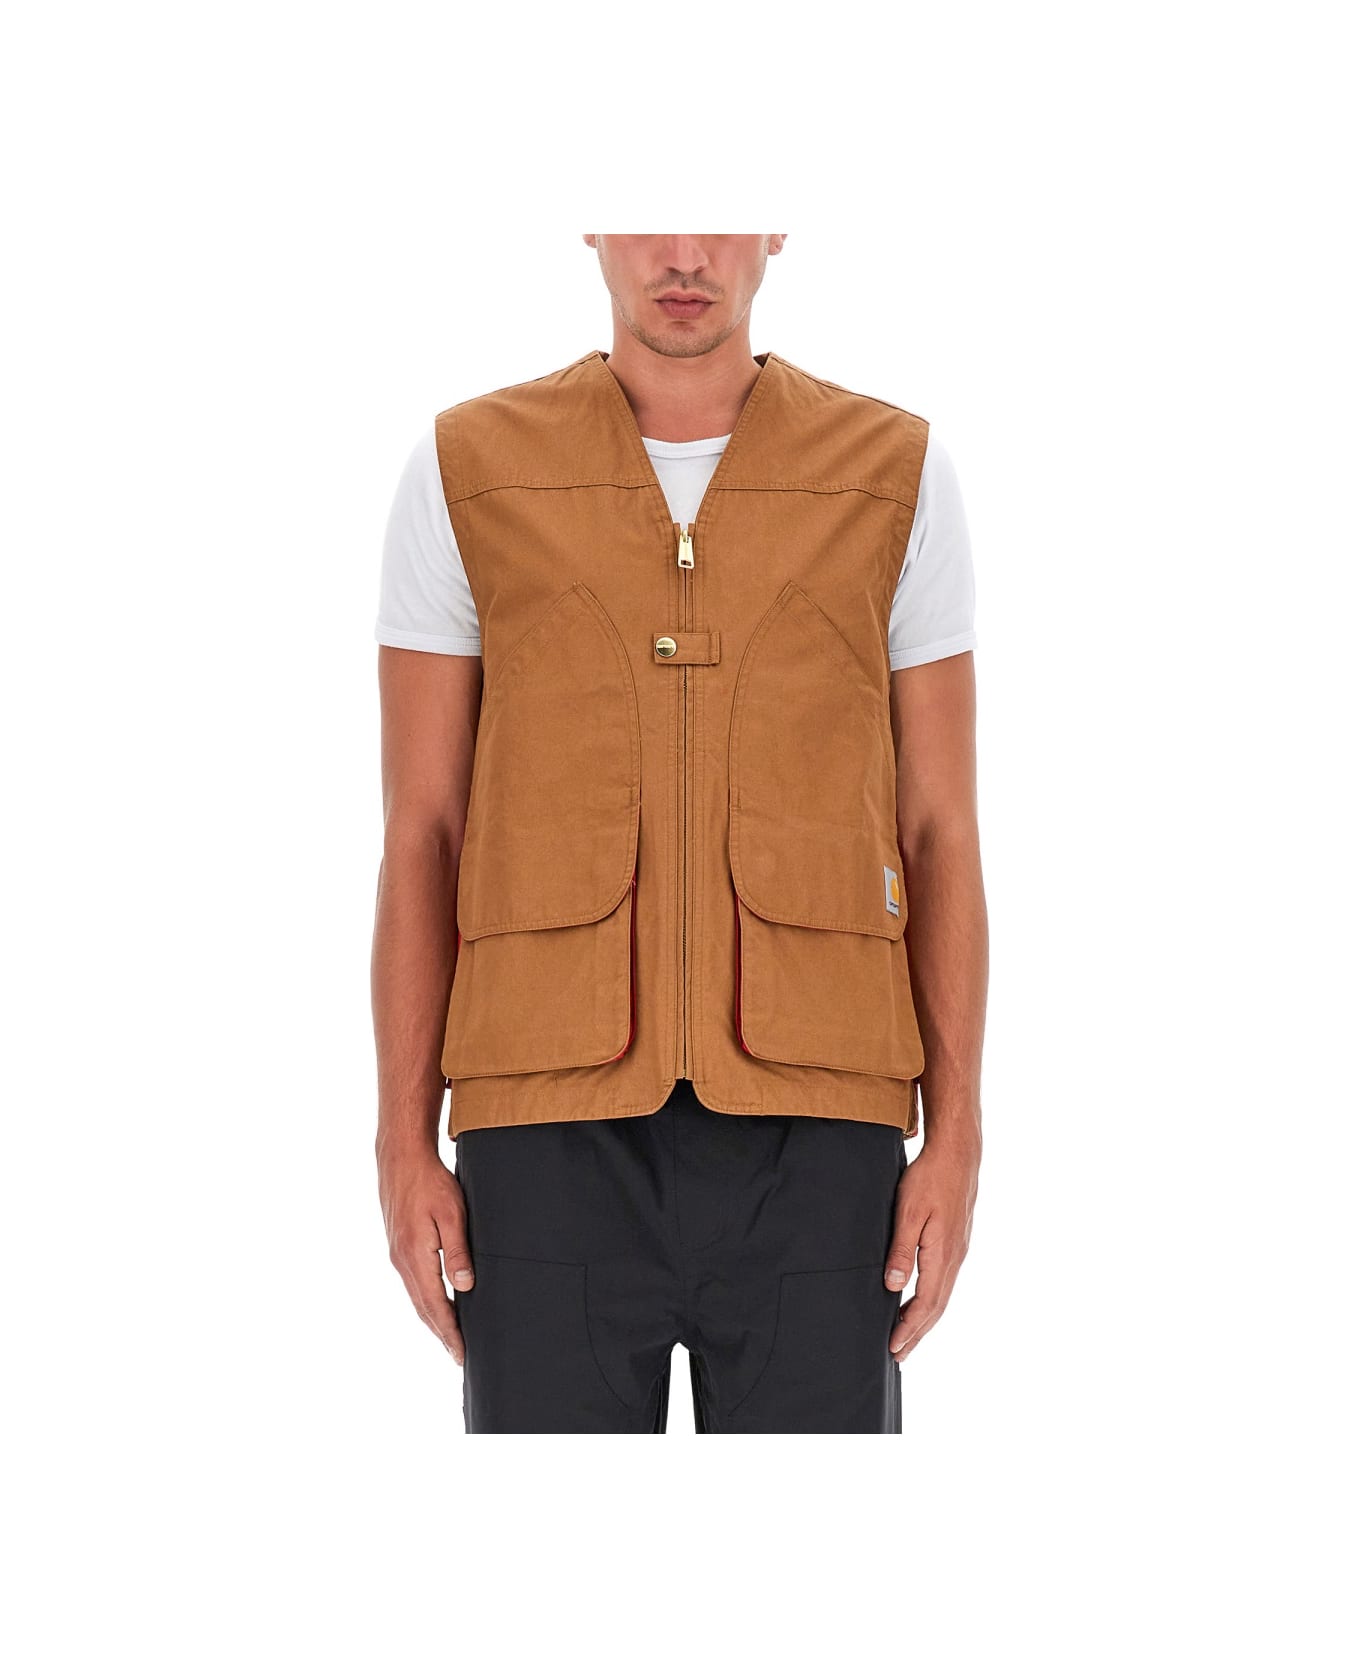 Carhartt Vests With Logo - BROWN